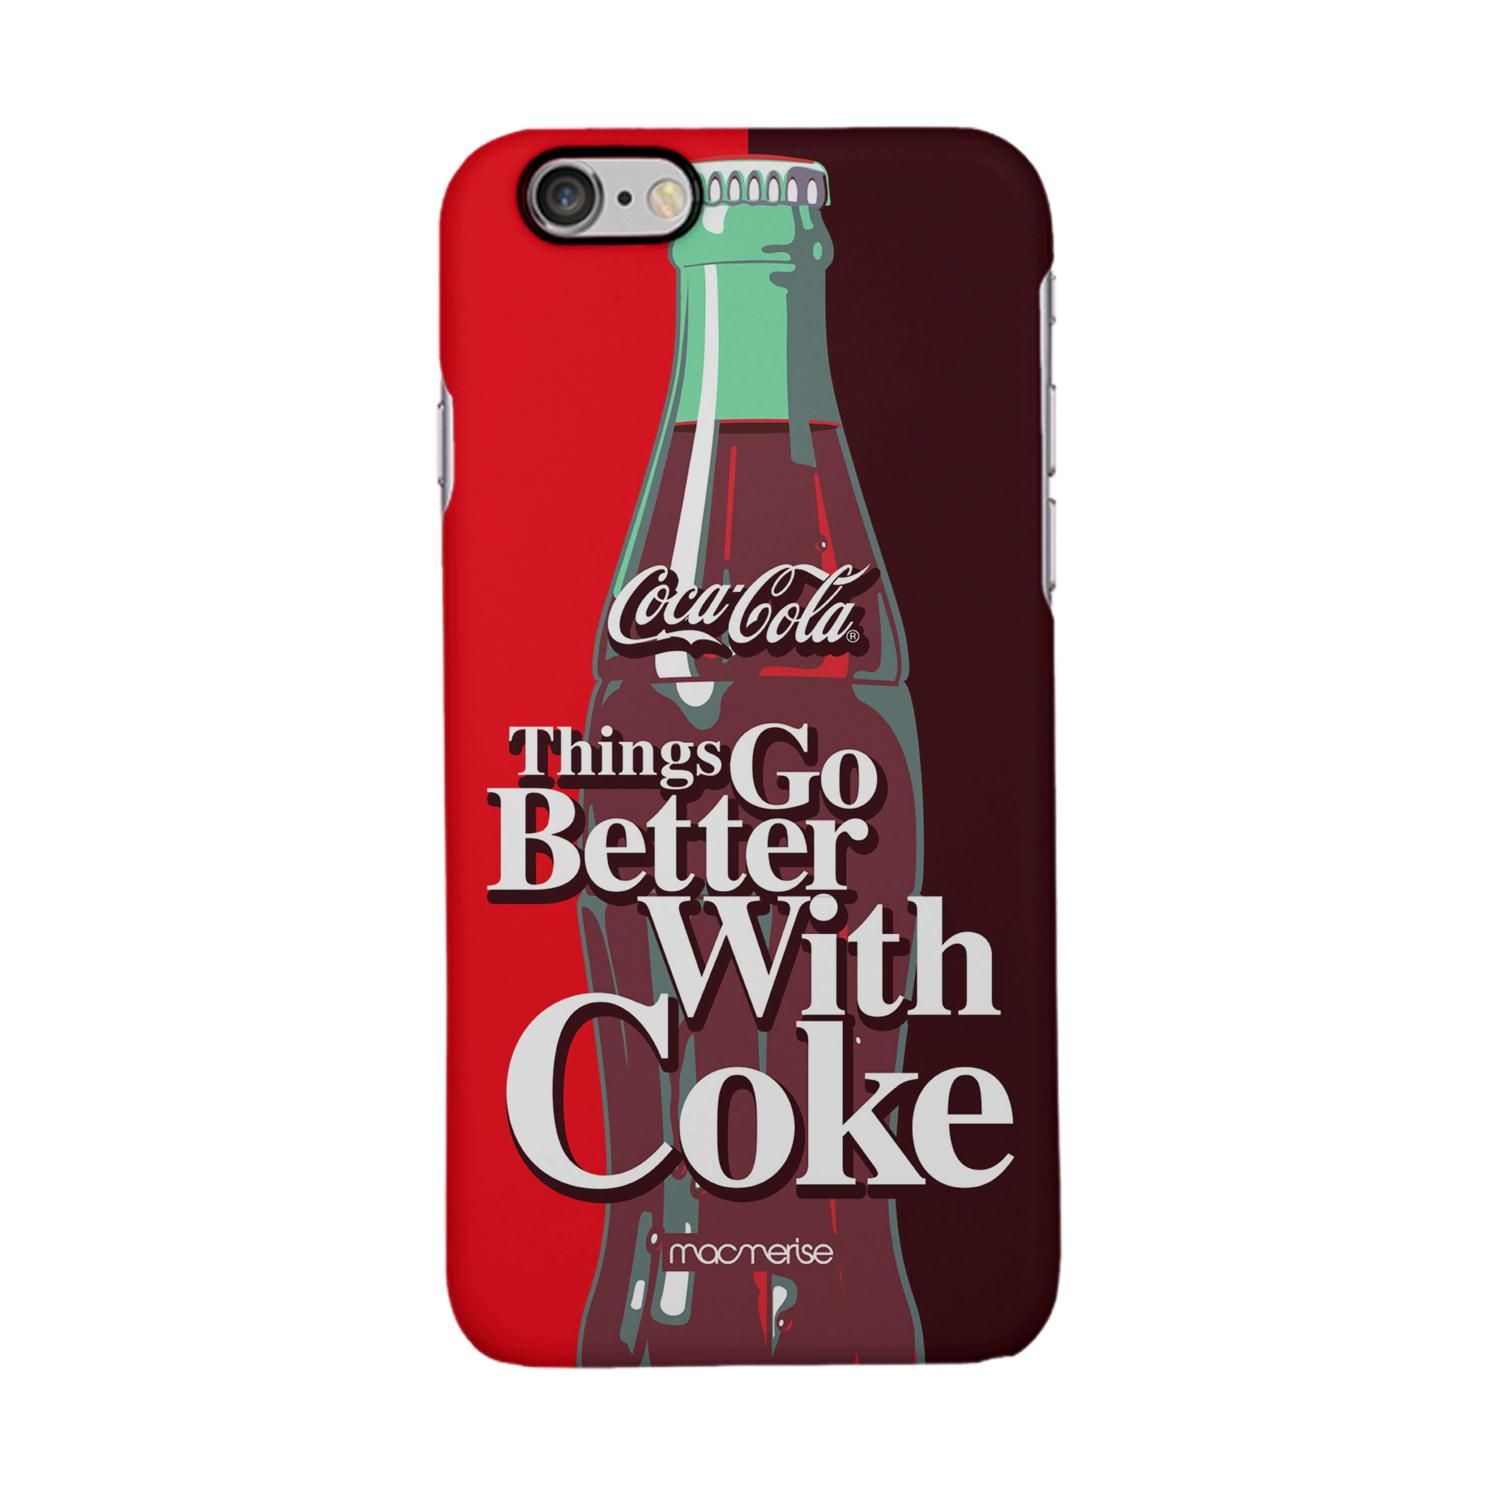 Go With Coke - Sleek Phone Case for iPhone 6